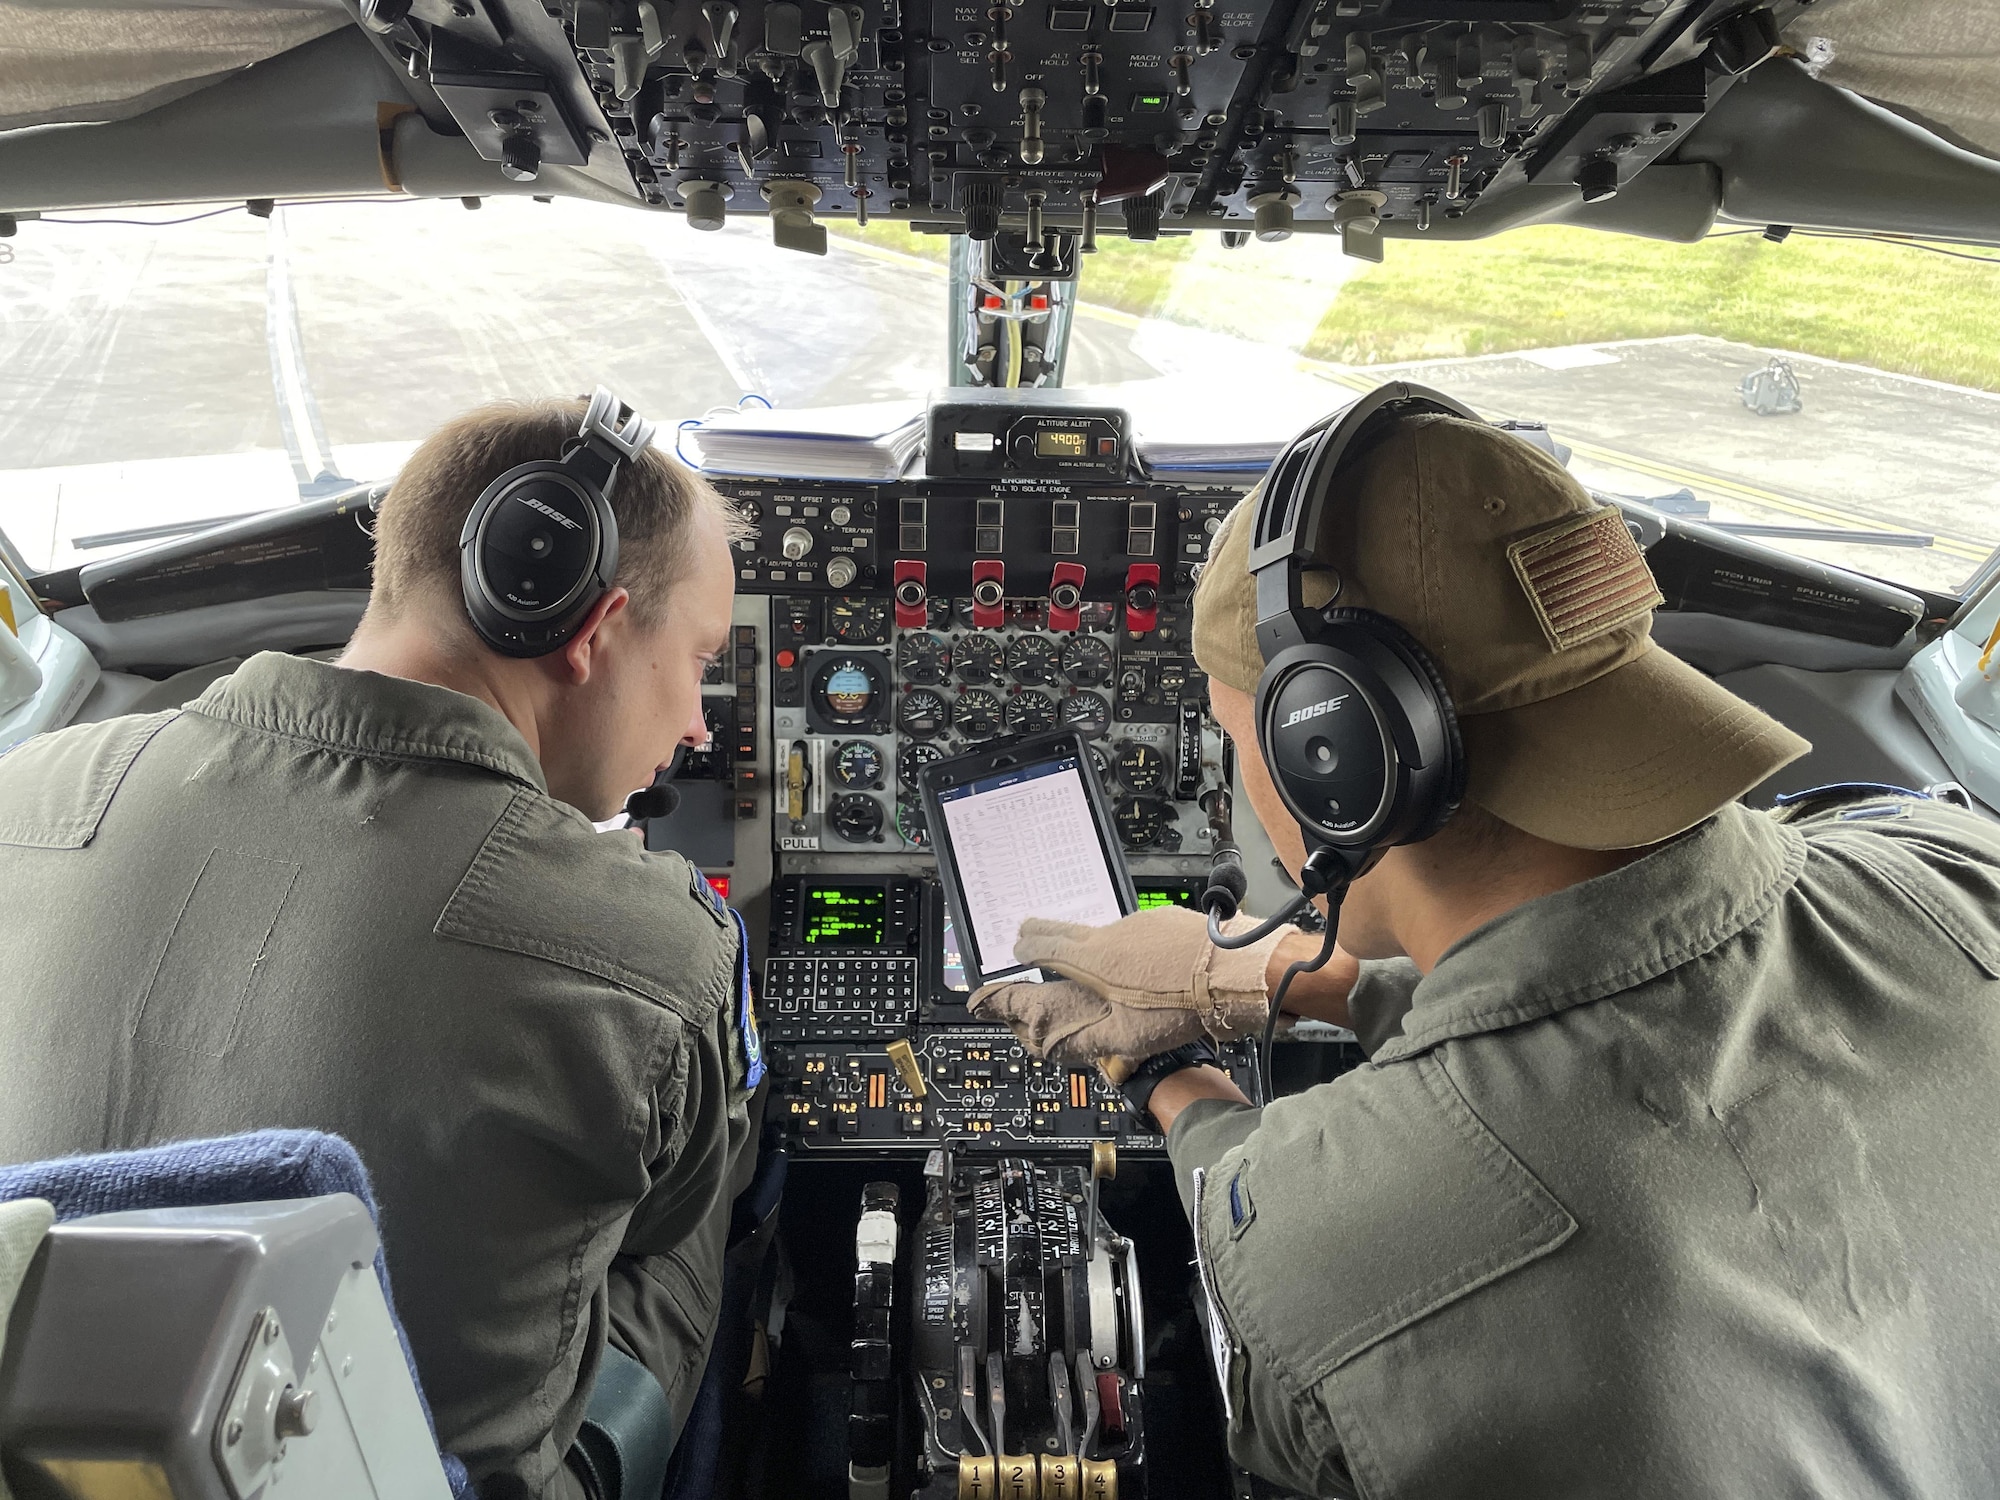 U.S. Air Force Capt. Nicholas Boonstra, 351st Air Refueling Squadron pilot, left, and 1st Lt. Mitchell Hooper, 351st ARS co-pilot, review flight information before a mission at Royal Air Force Mildenhall, England, Aug. 19, 2021. The 100th Air Refueling Wing provides unrivaled air refueling support throughout the European and African areas of responsibility. (U.S. Air Force photo by Senior Airman Joseph Barron)